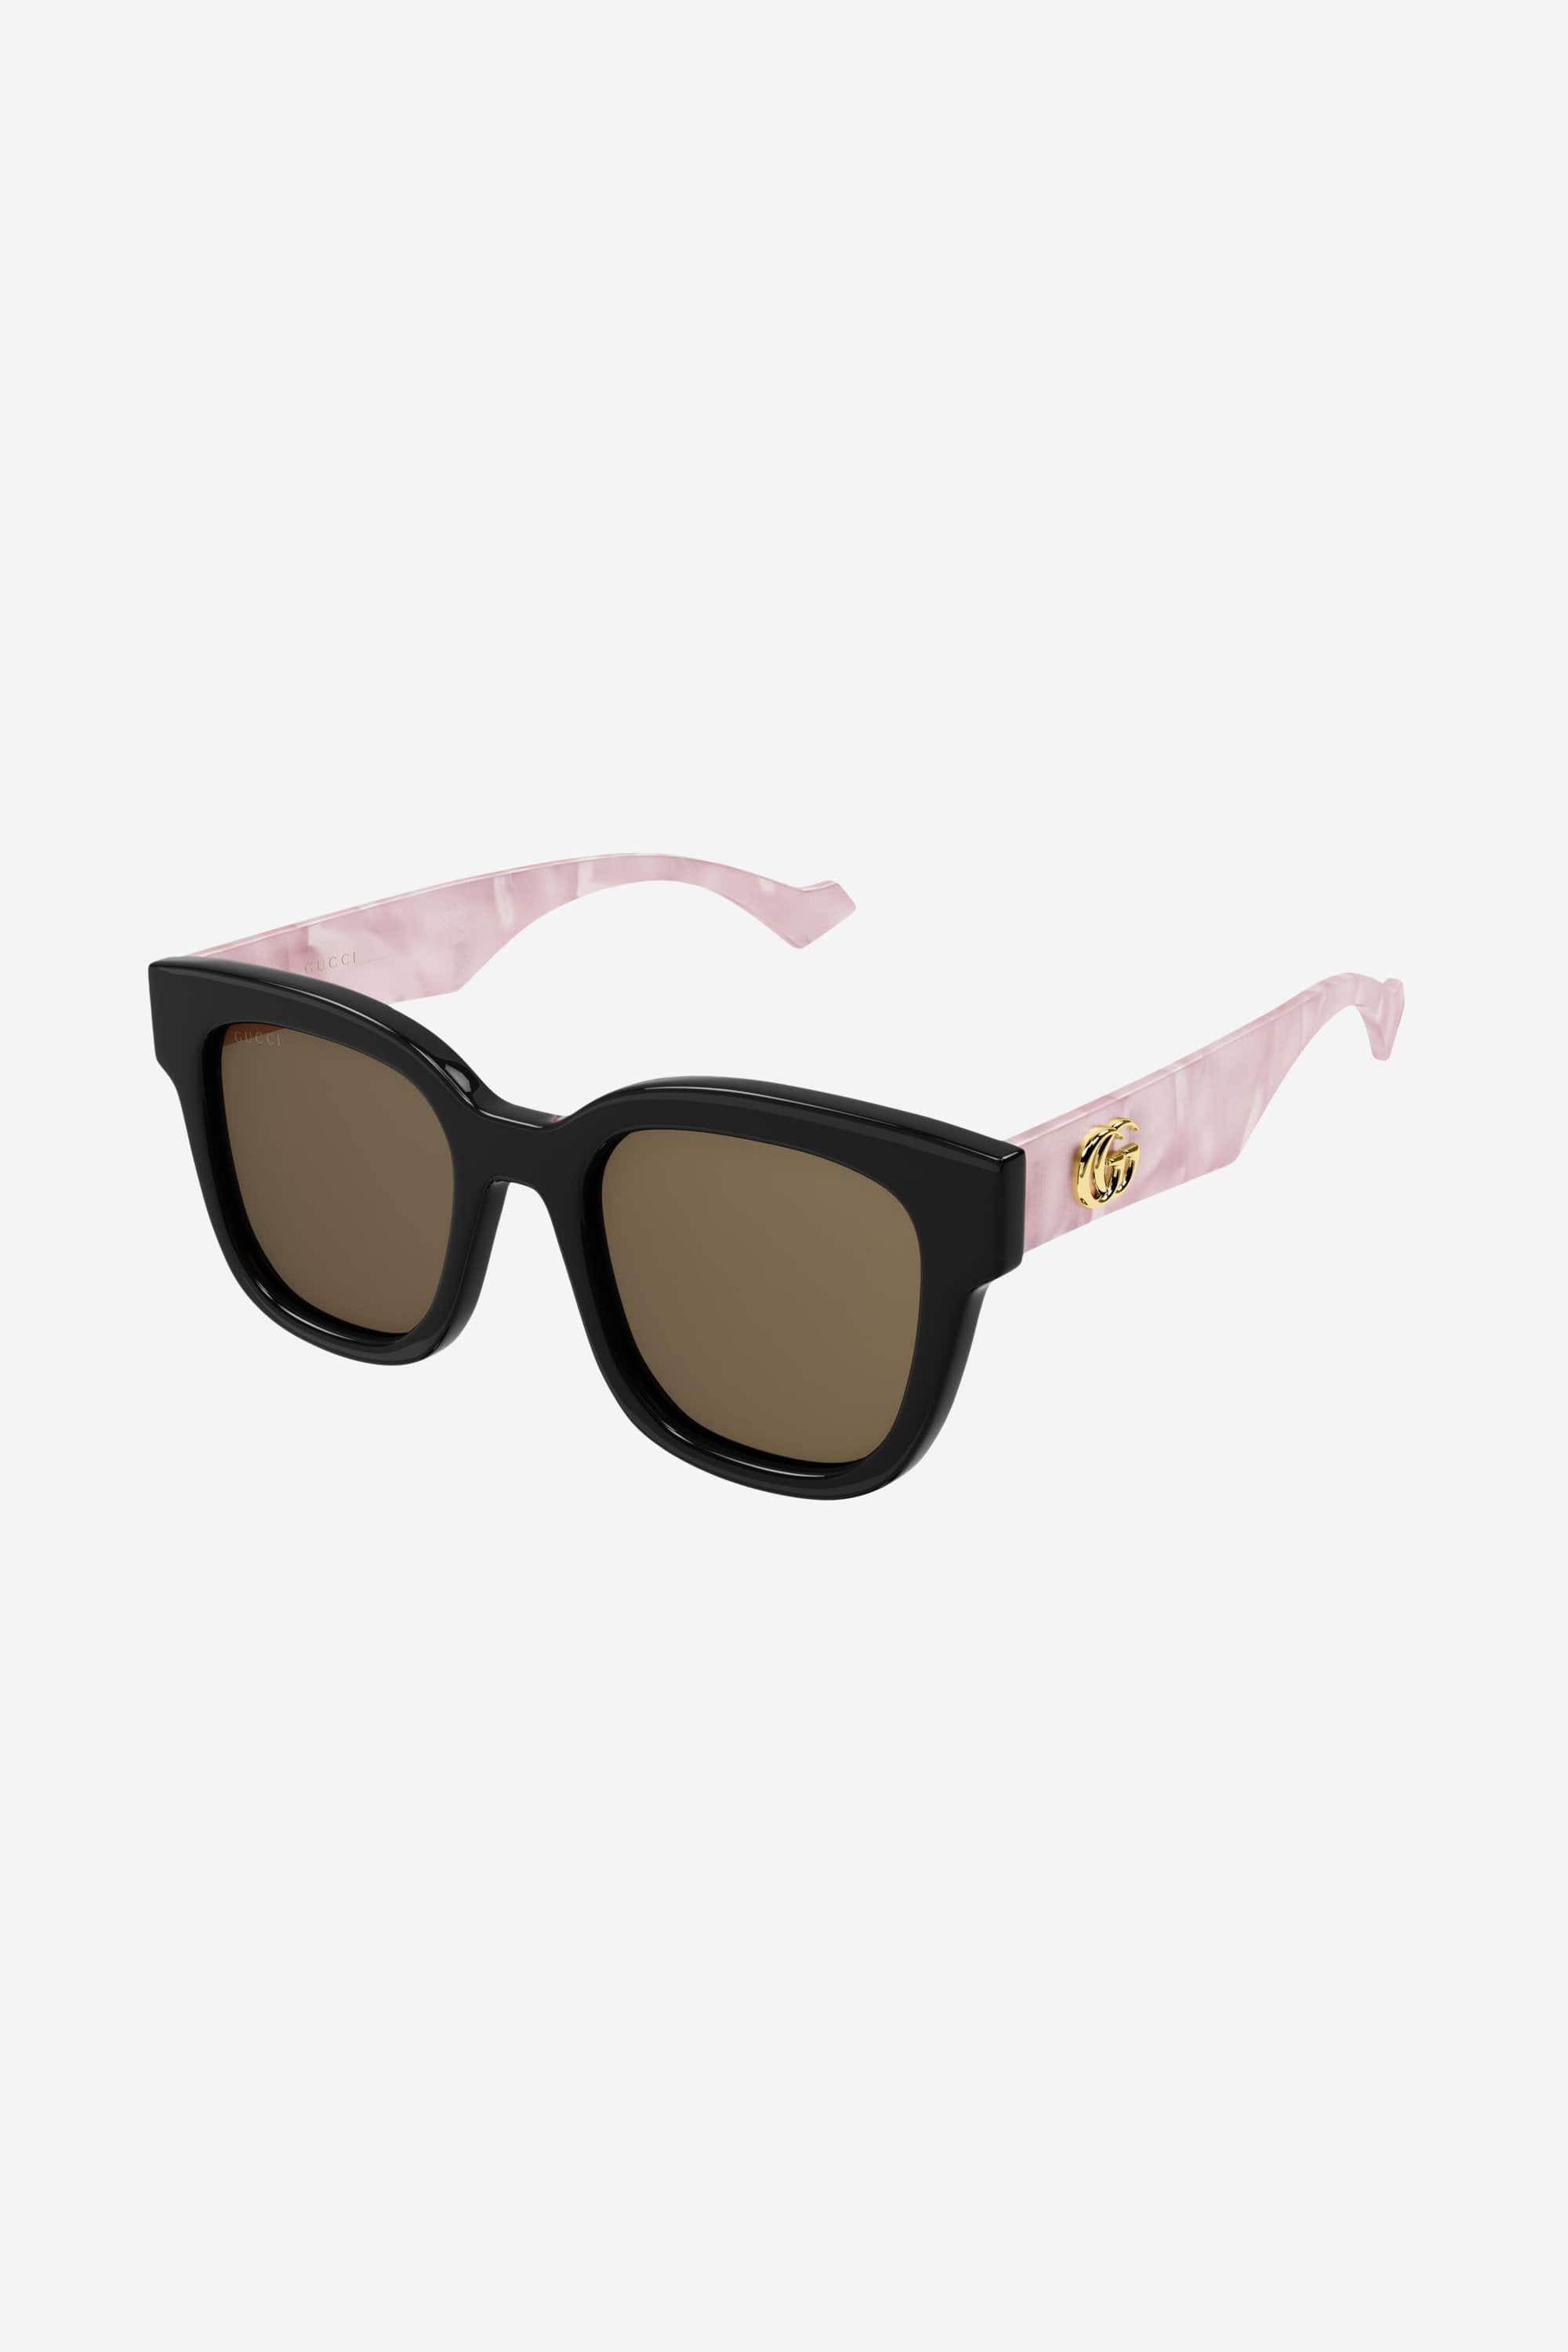 Gucci Squared Femenine Black And Marble Pink Sunglasses in Brown | Lyst